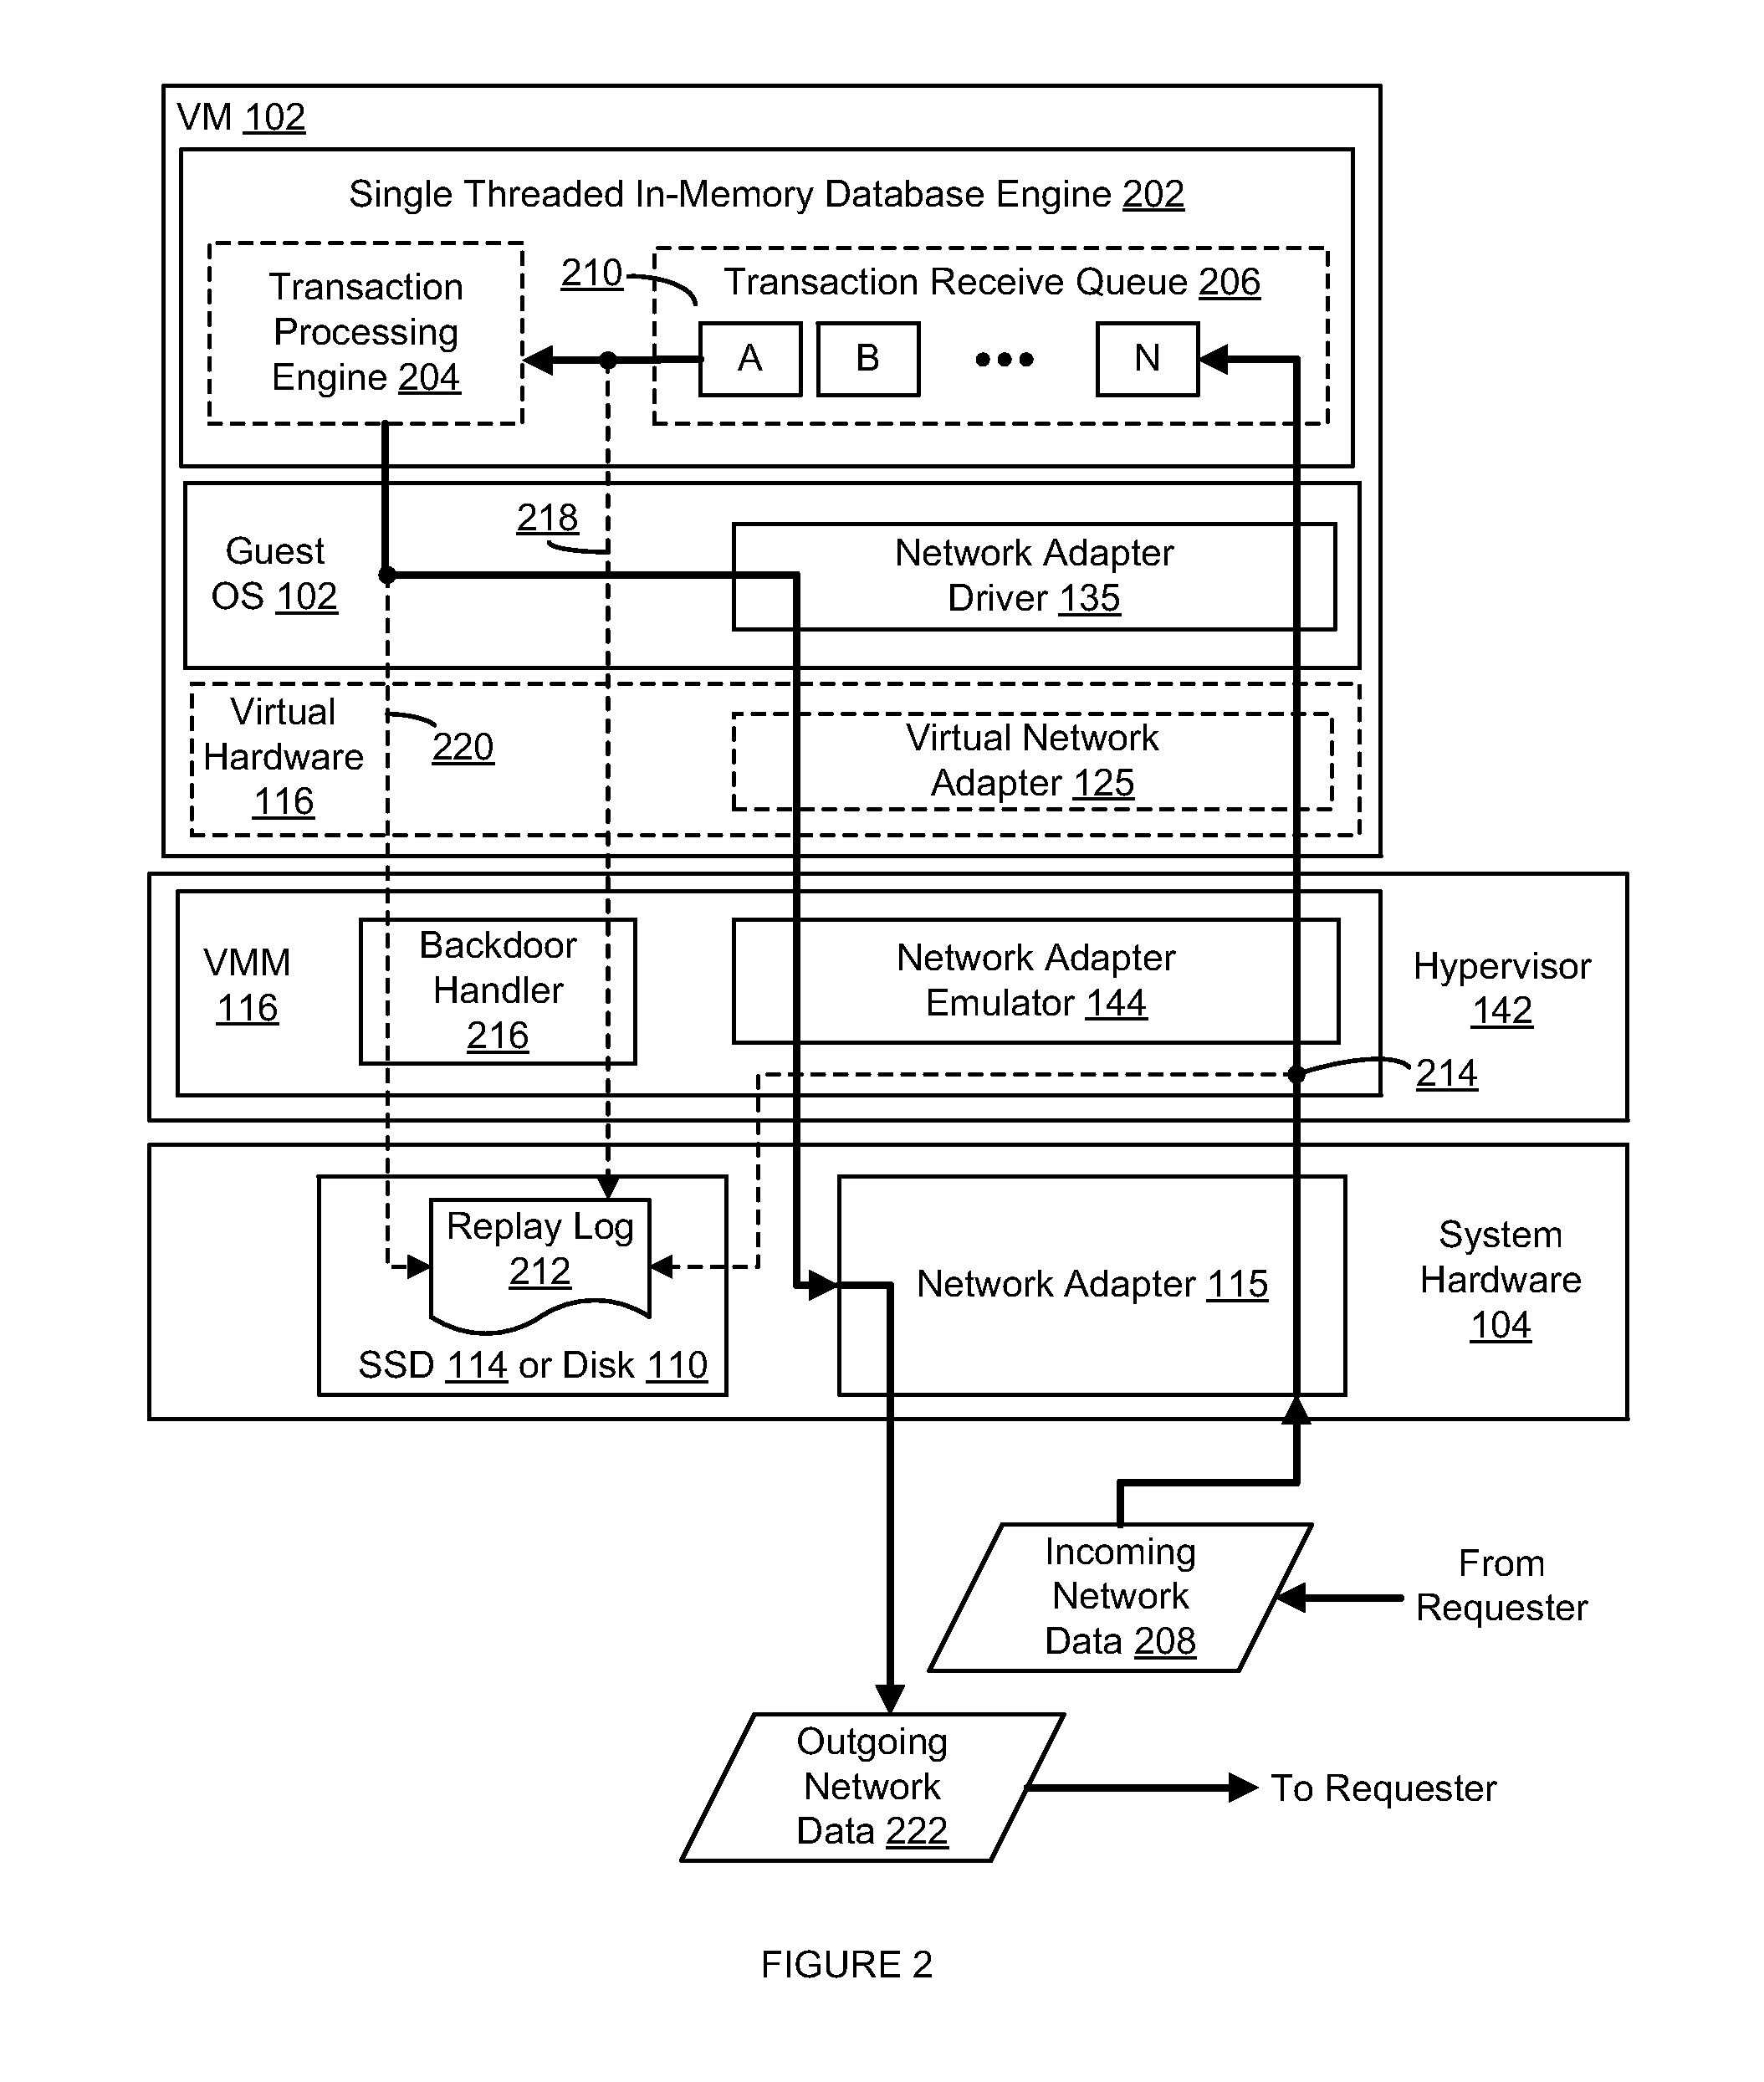 Efficient overcommitment of main-memory based virtual database system to disk